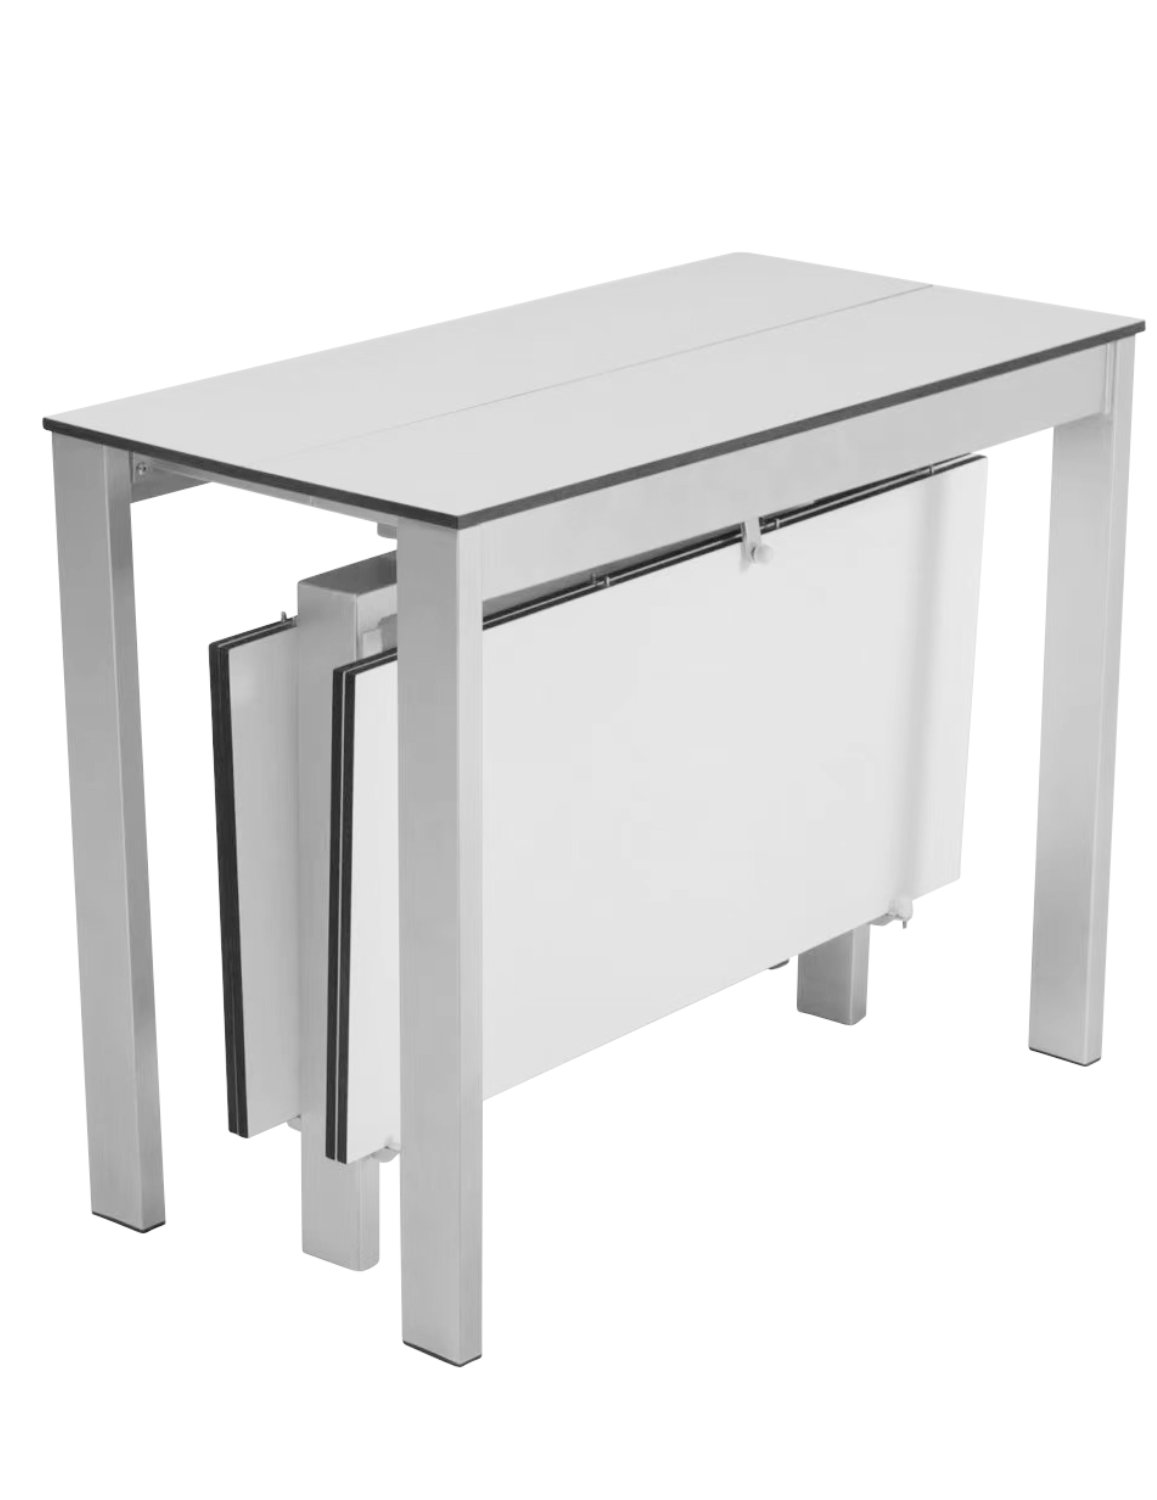 Junior Giant - Console Extending Table Transformer seats 12